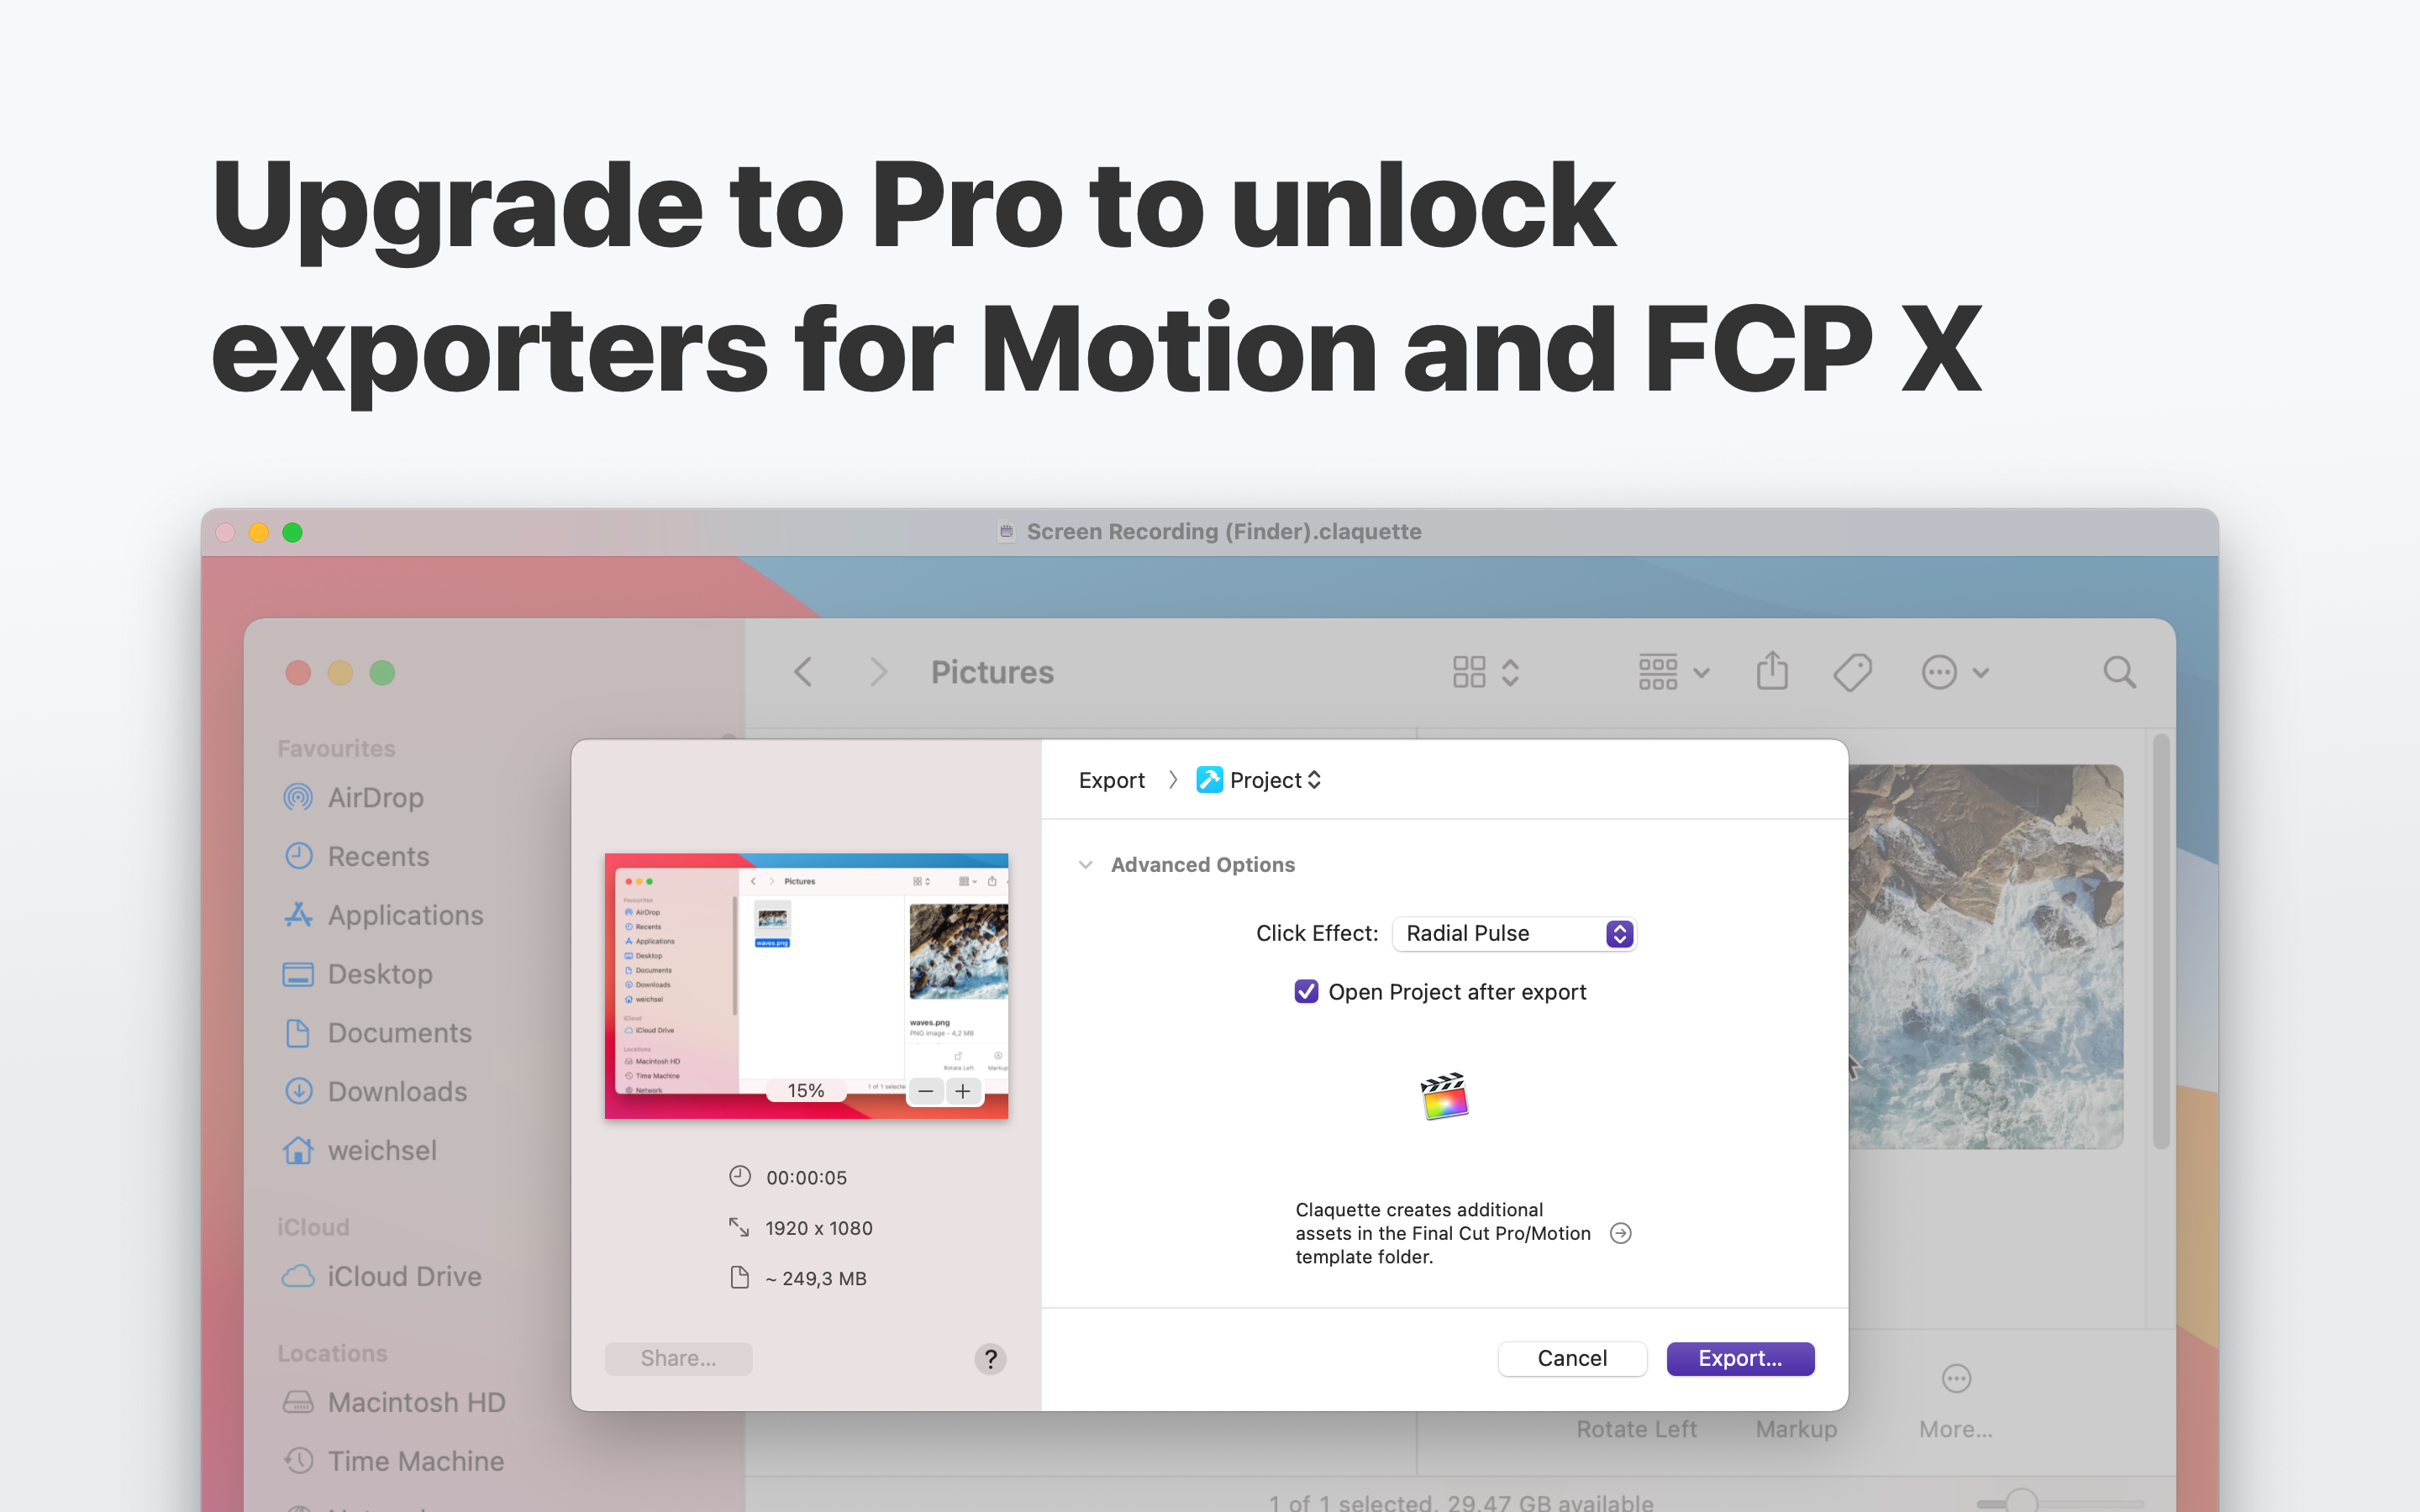 Upgrade to Pro to unlock exporters for Motion and FCP X